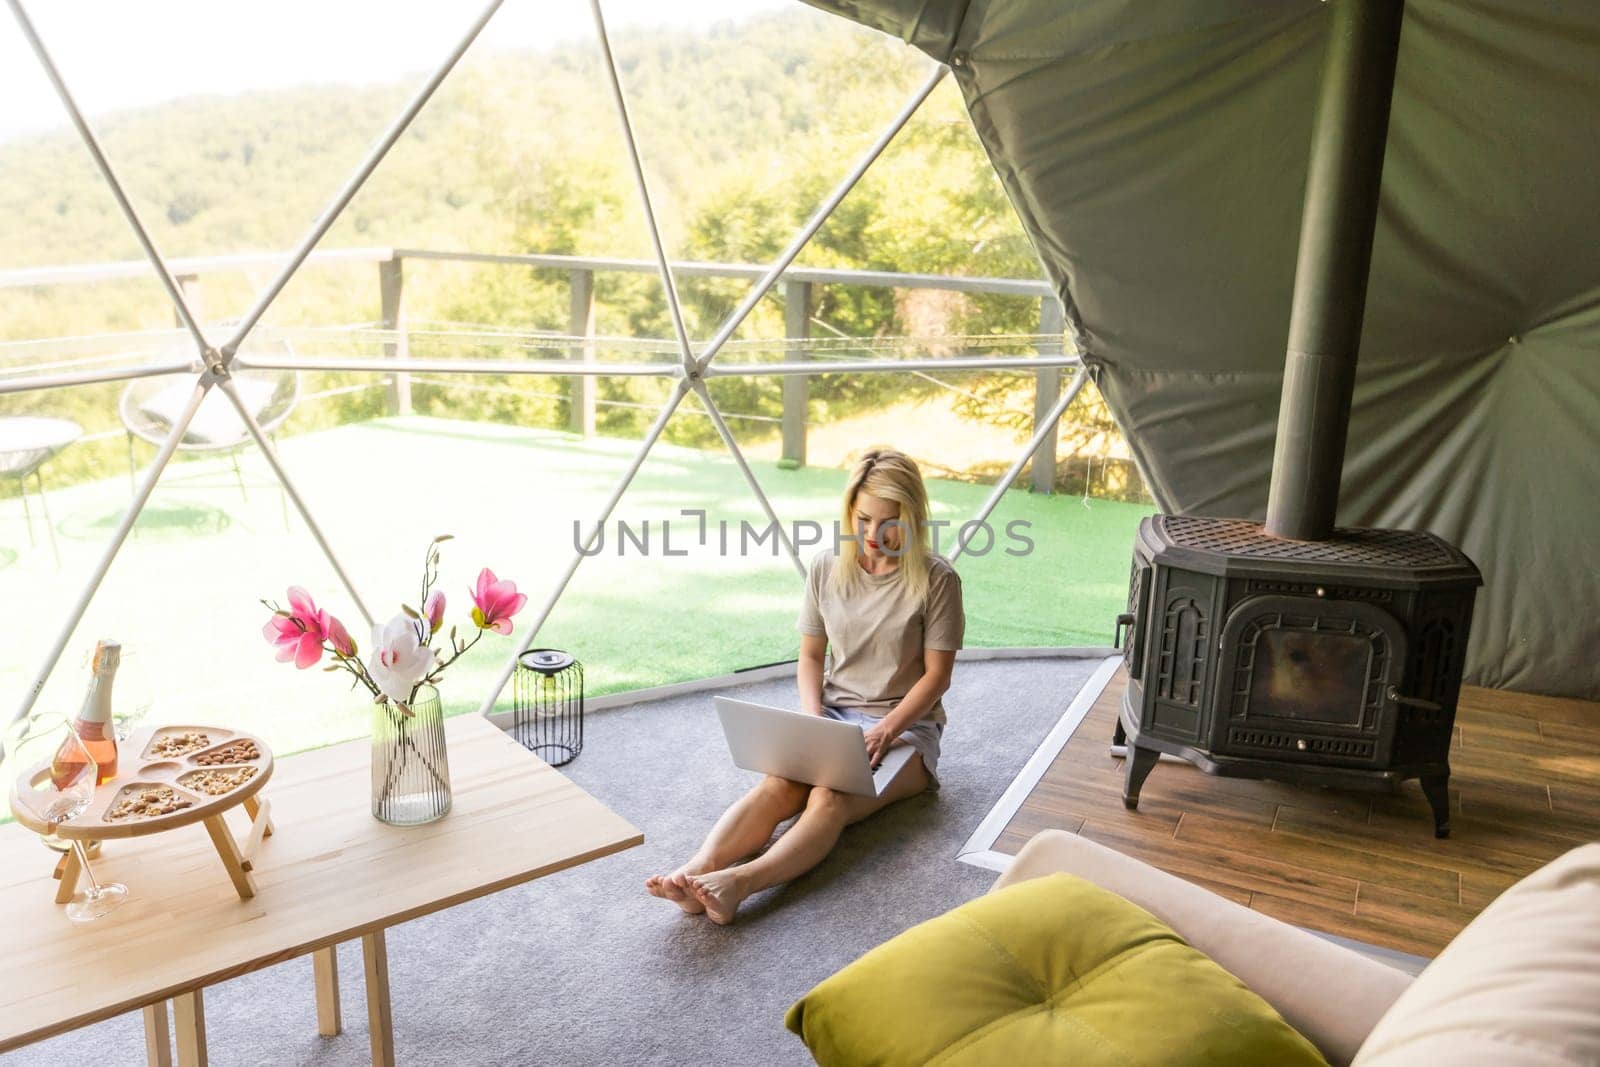 Transparent bubble tent at glamping, Lush forest around and interior. Woman with laptop by Andelov13